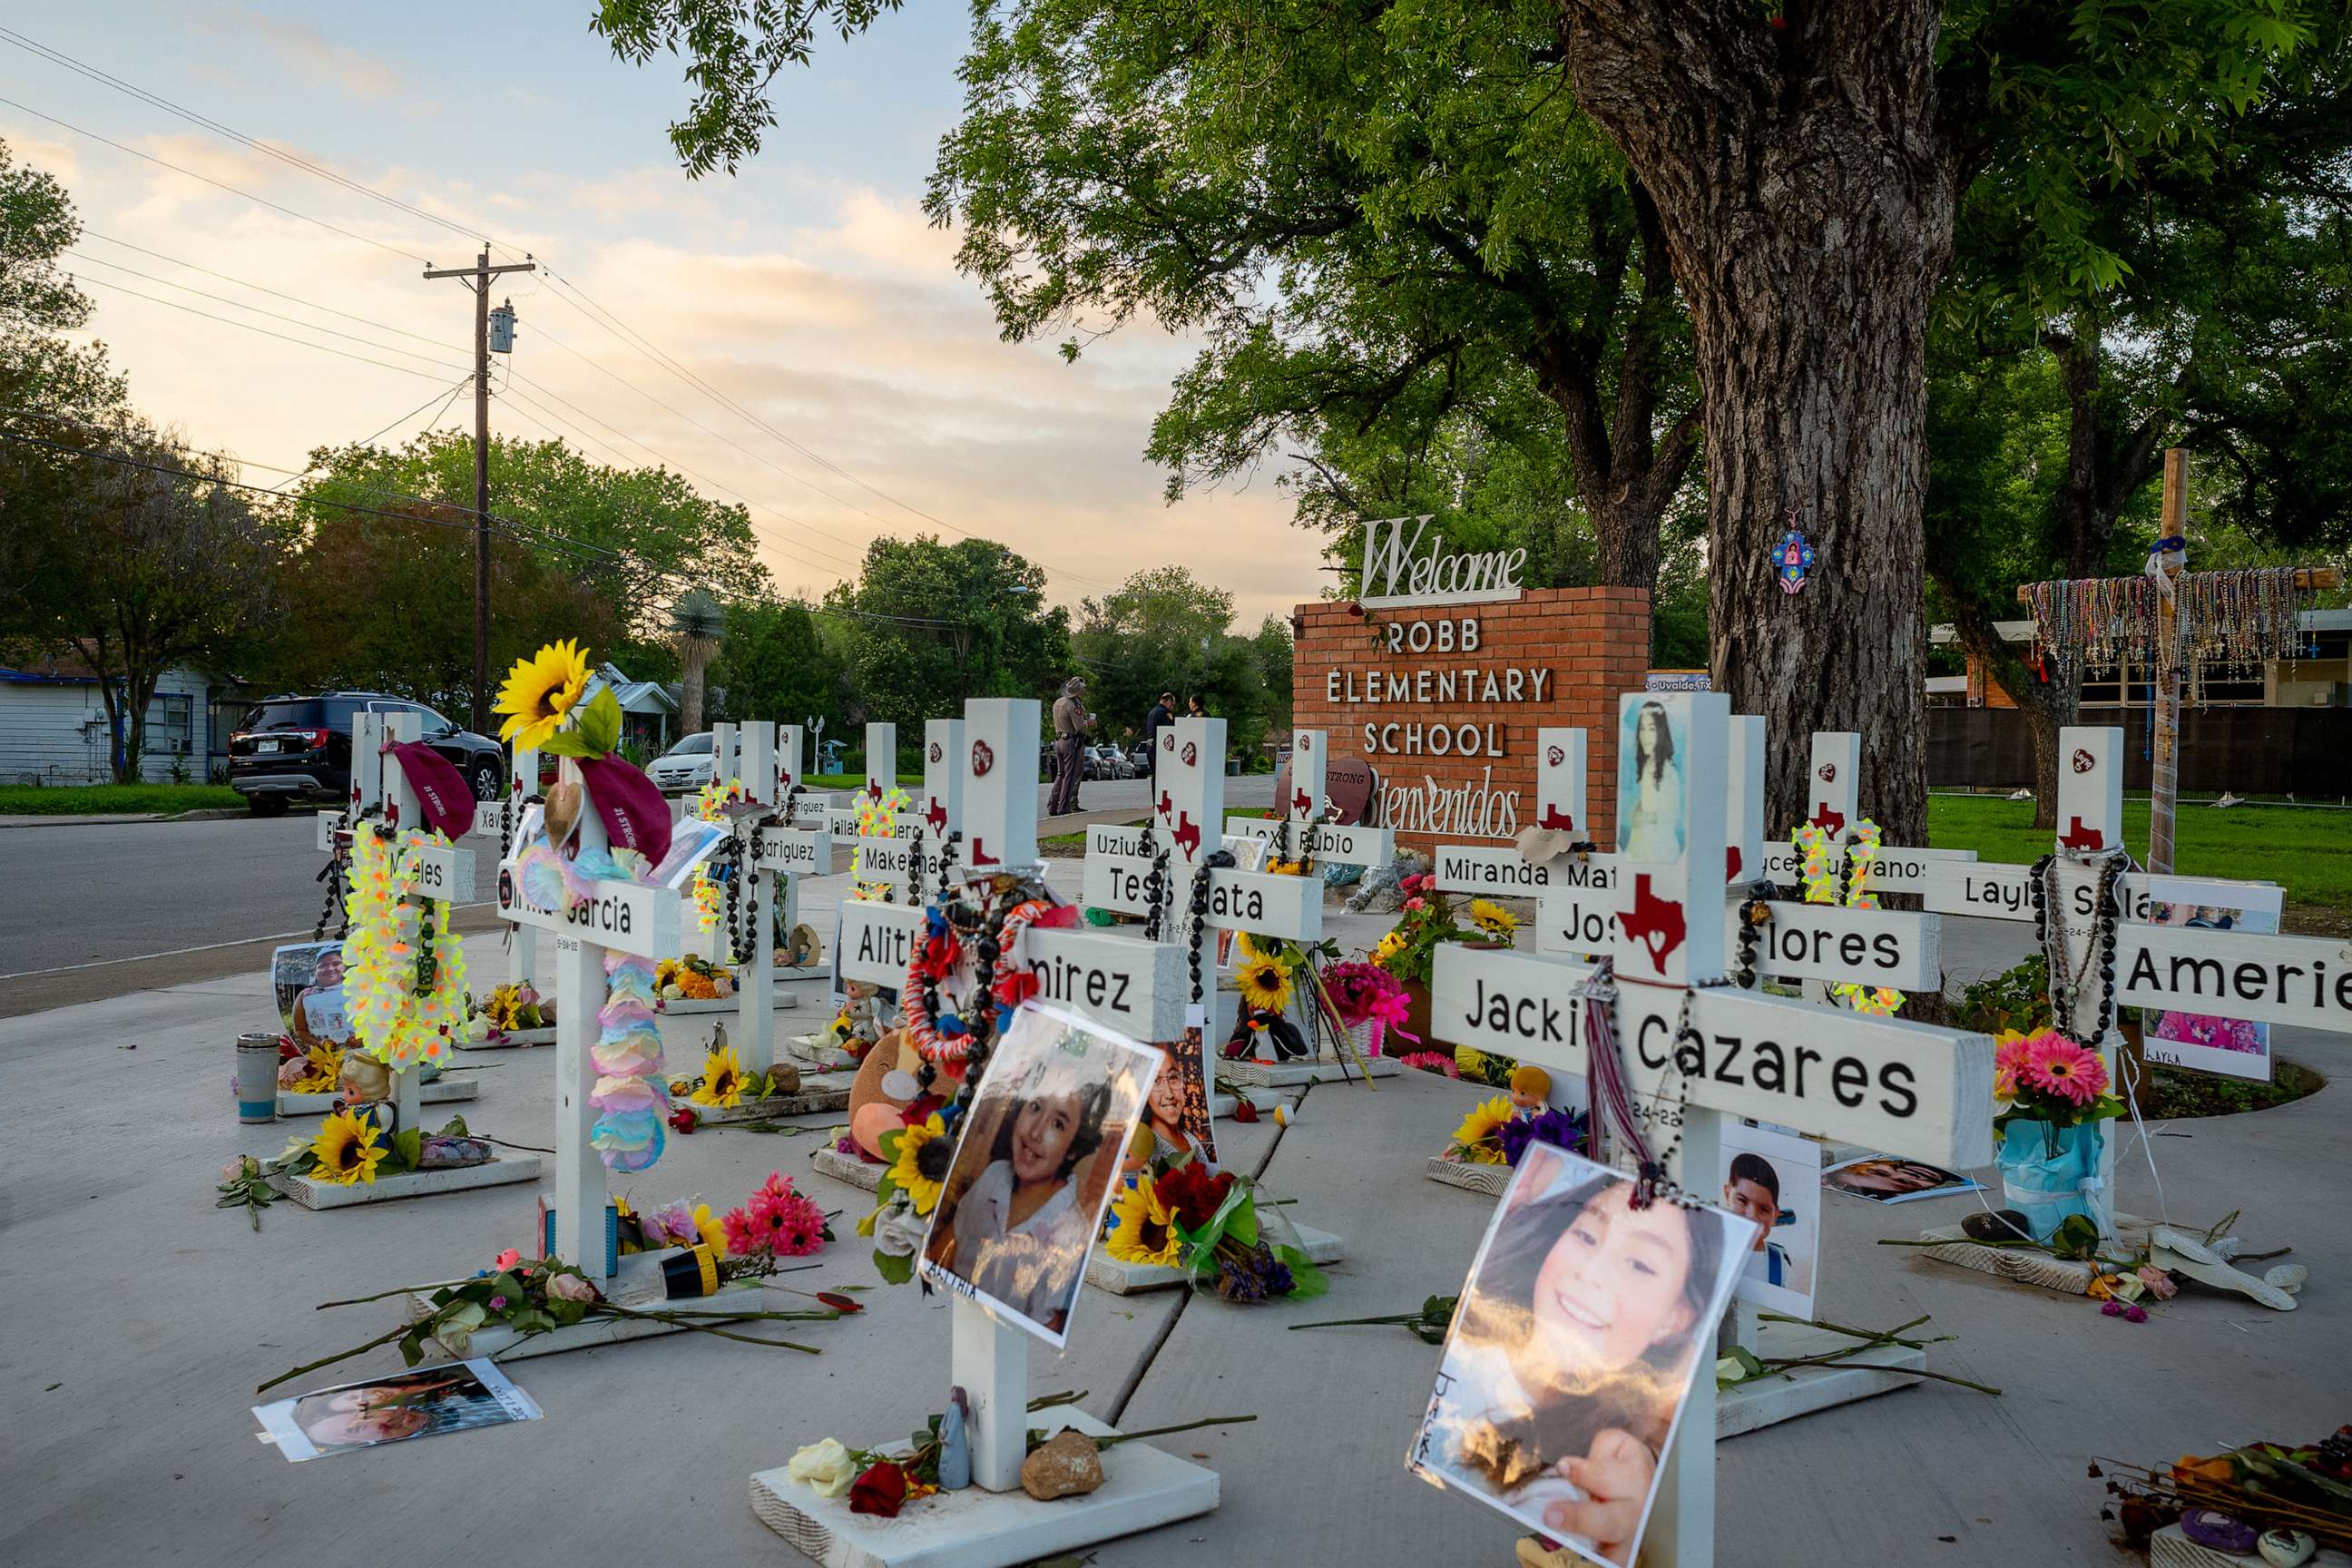 PHOTO: A memorial dedicated to the 19 children and two adults murdered, May 24, 2022, during the mass shooting at Robb Elementary School in Uvalde, Texas.